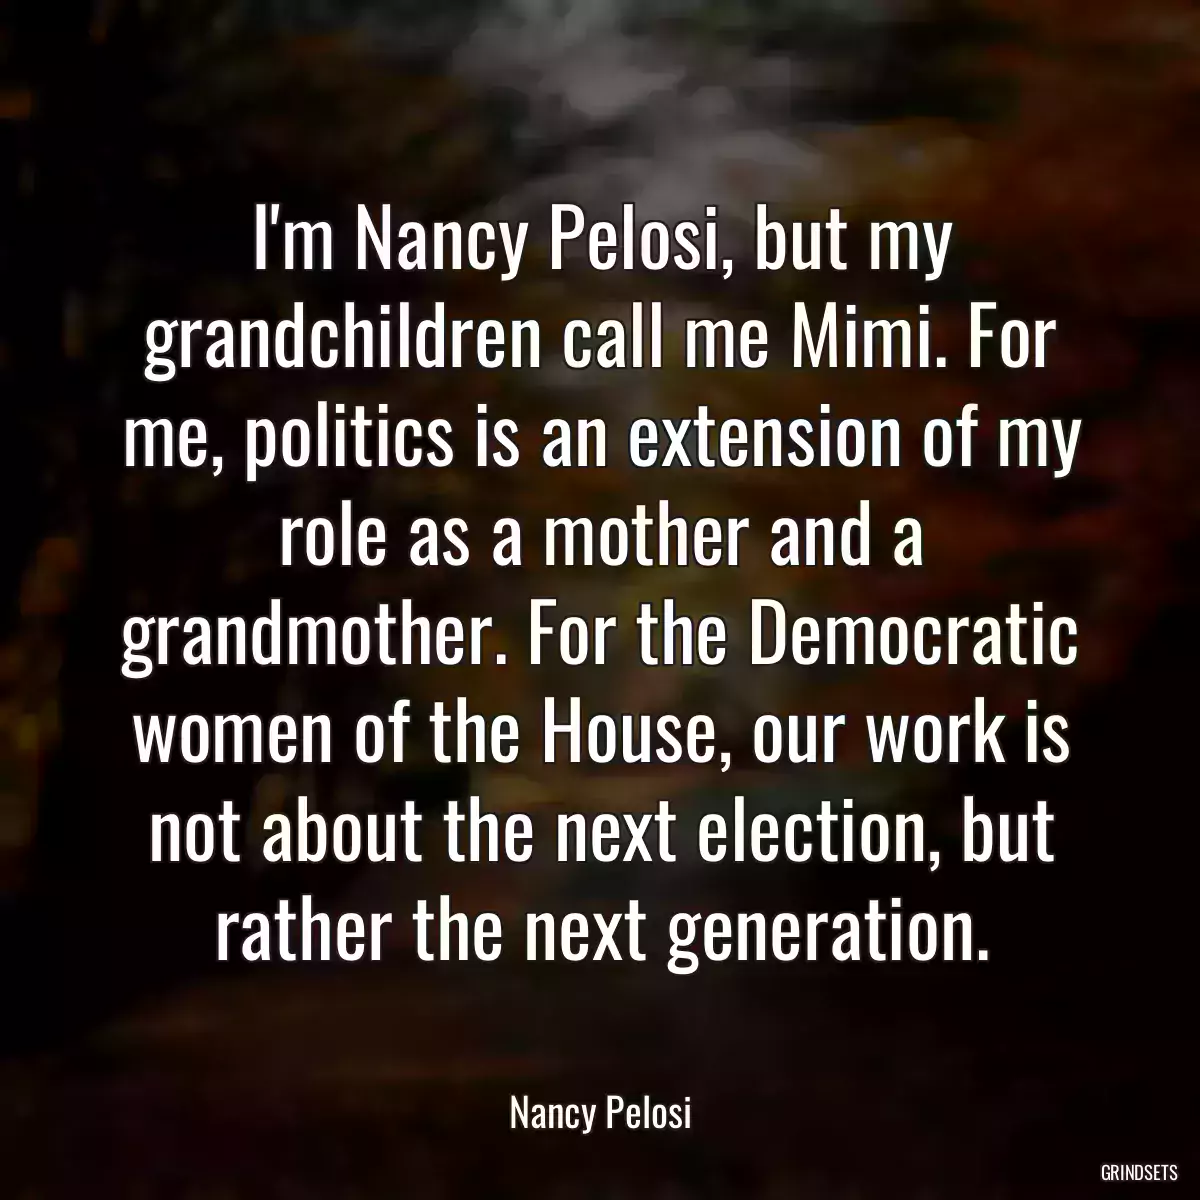 I\'m Nancy Pelosi, but my grandchildren call me Mimi. For me, politics is an extension of my role as a mother and a grandmother. For the Democratic women of the House, our work is not about the next election, but rather the next generation.